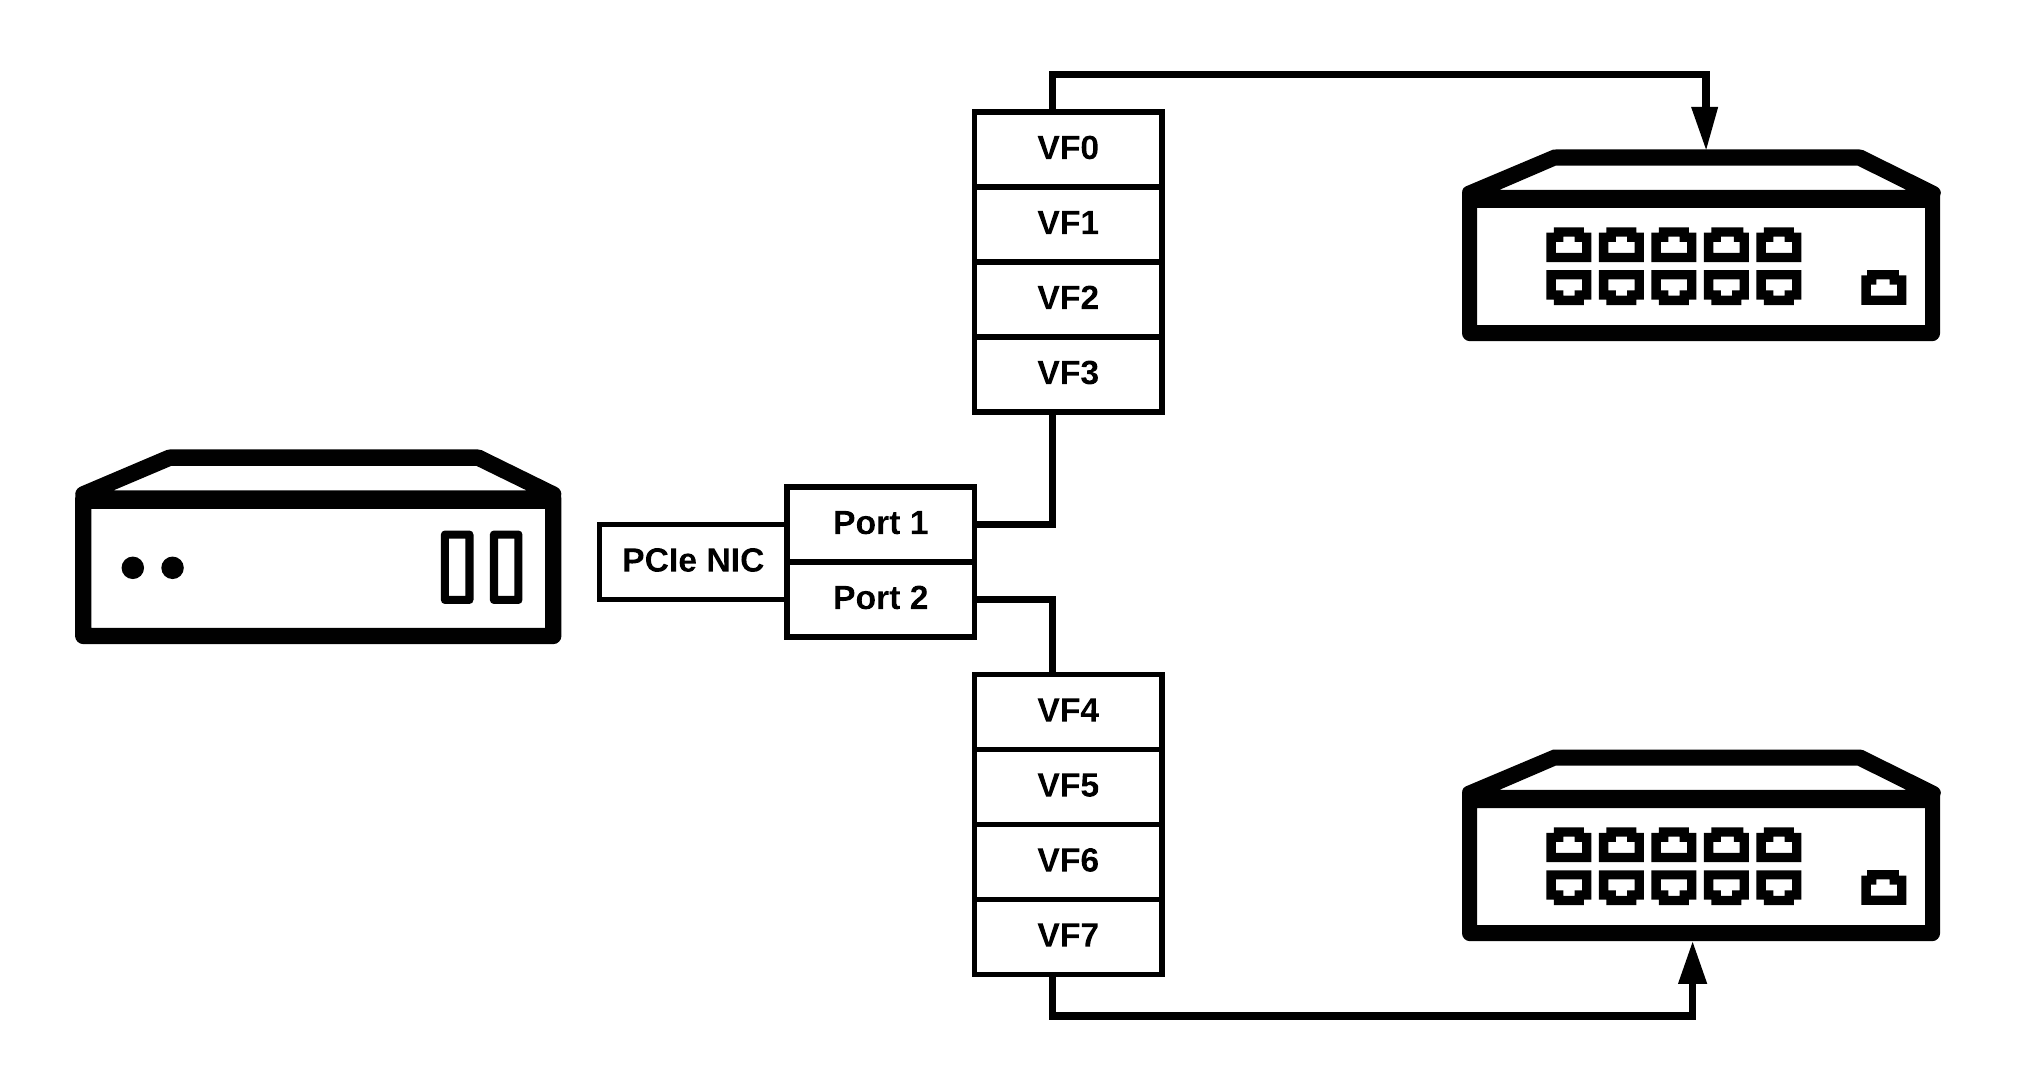 Baremetal host with single NIC two ports split to multiple vNICs connected to two switches